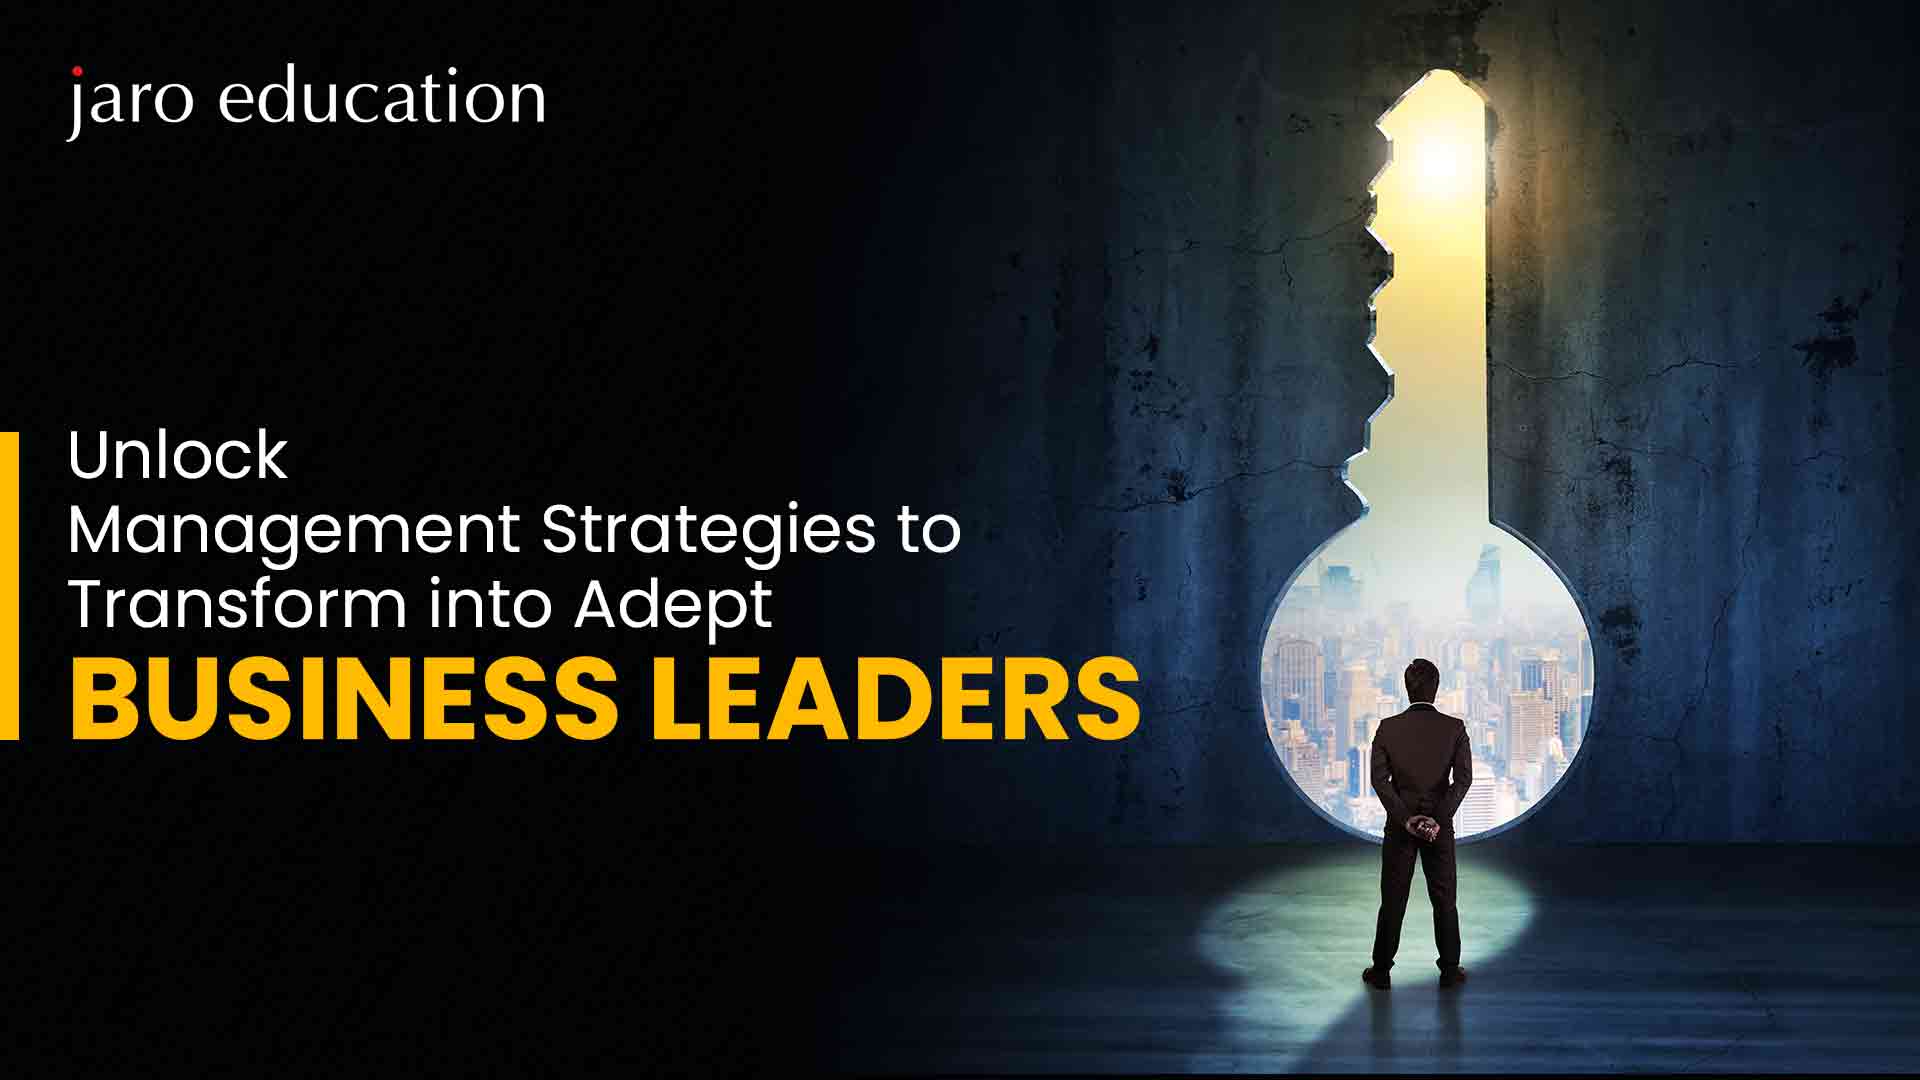 Unlock Management Strategies to Transform into Adept Business Leaders